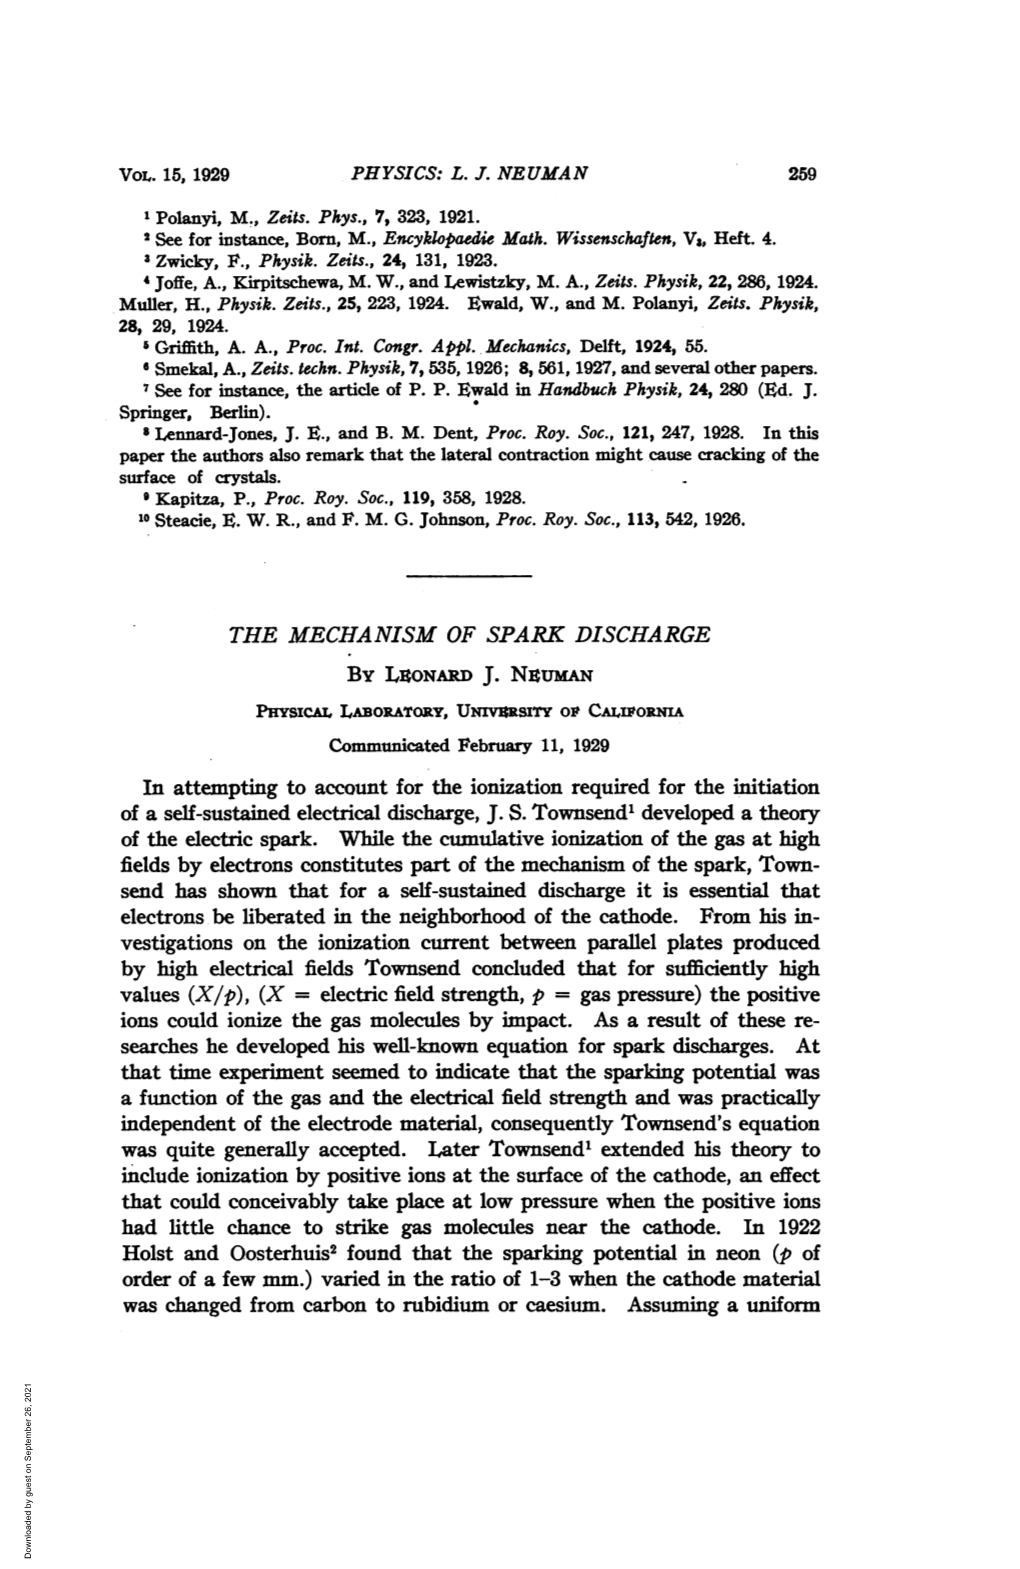 THE MECHANISM of SPARK DISCHARGE Was Quite Generally Accepted. Later Townsend' Extended His Theory To